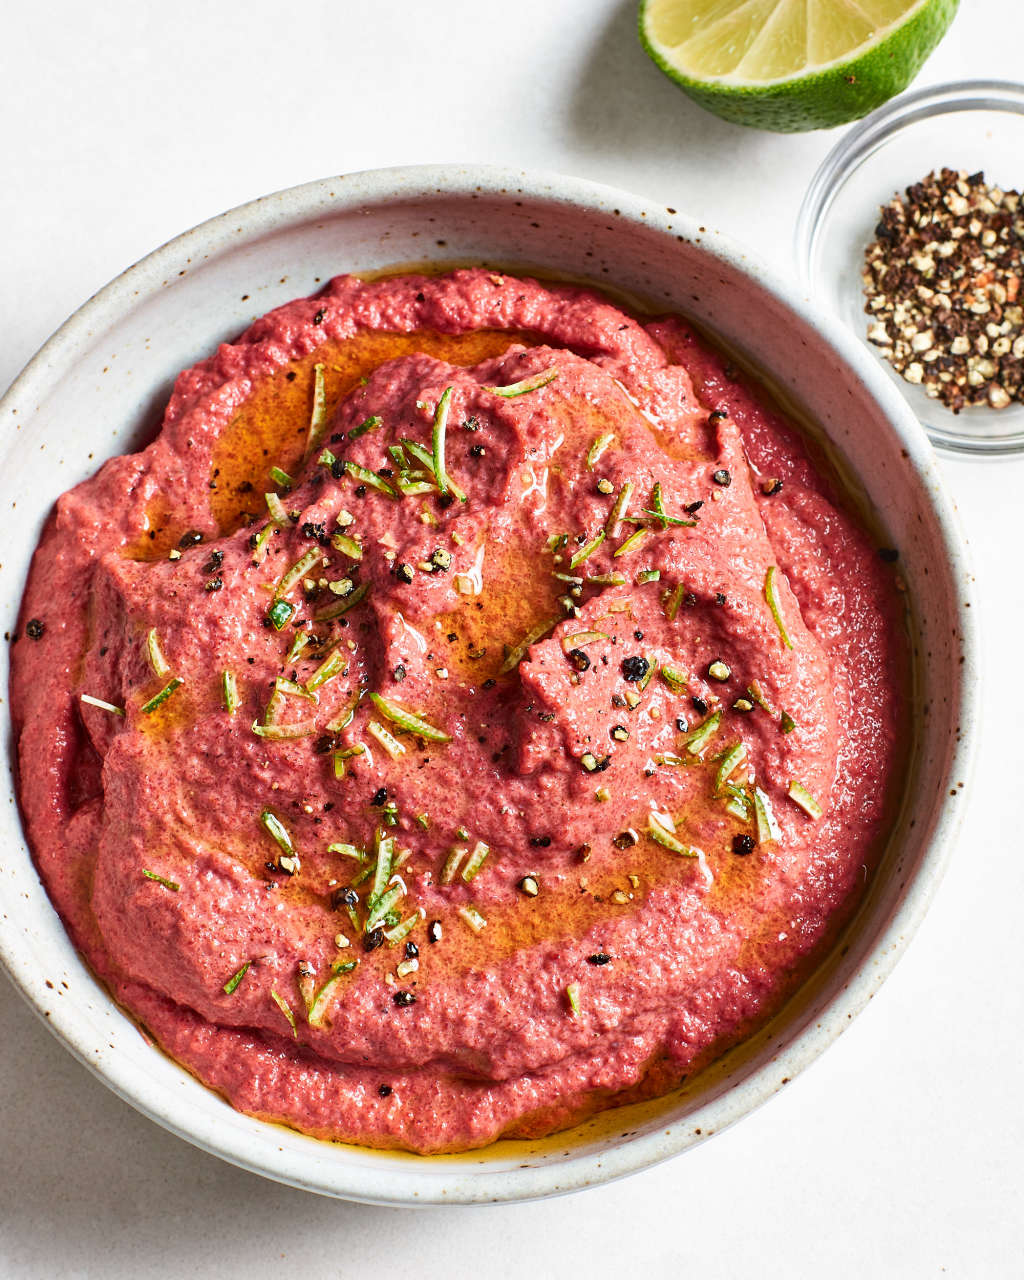 Bright-Pink Beet Hummus Recipe in 5 Minutes! Try it!